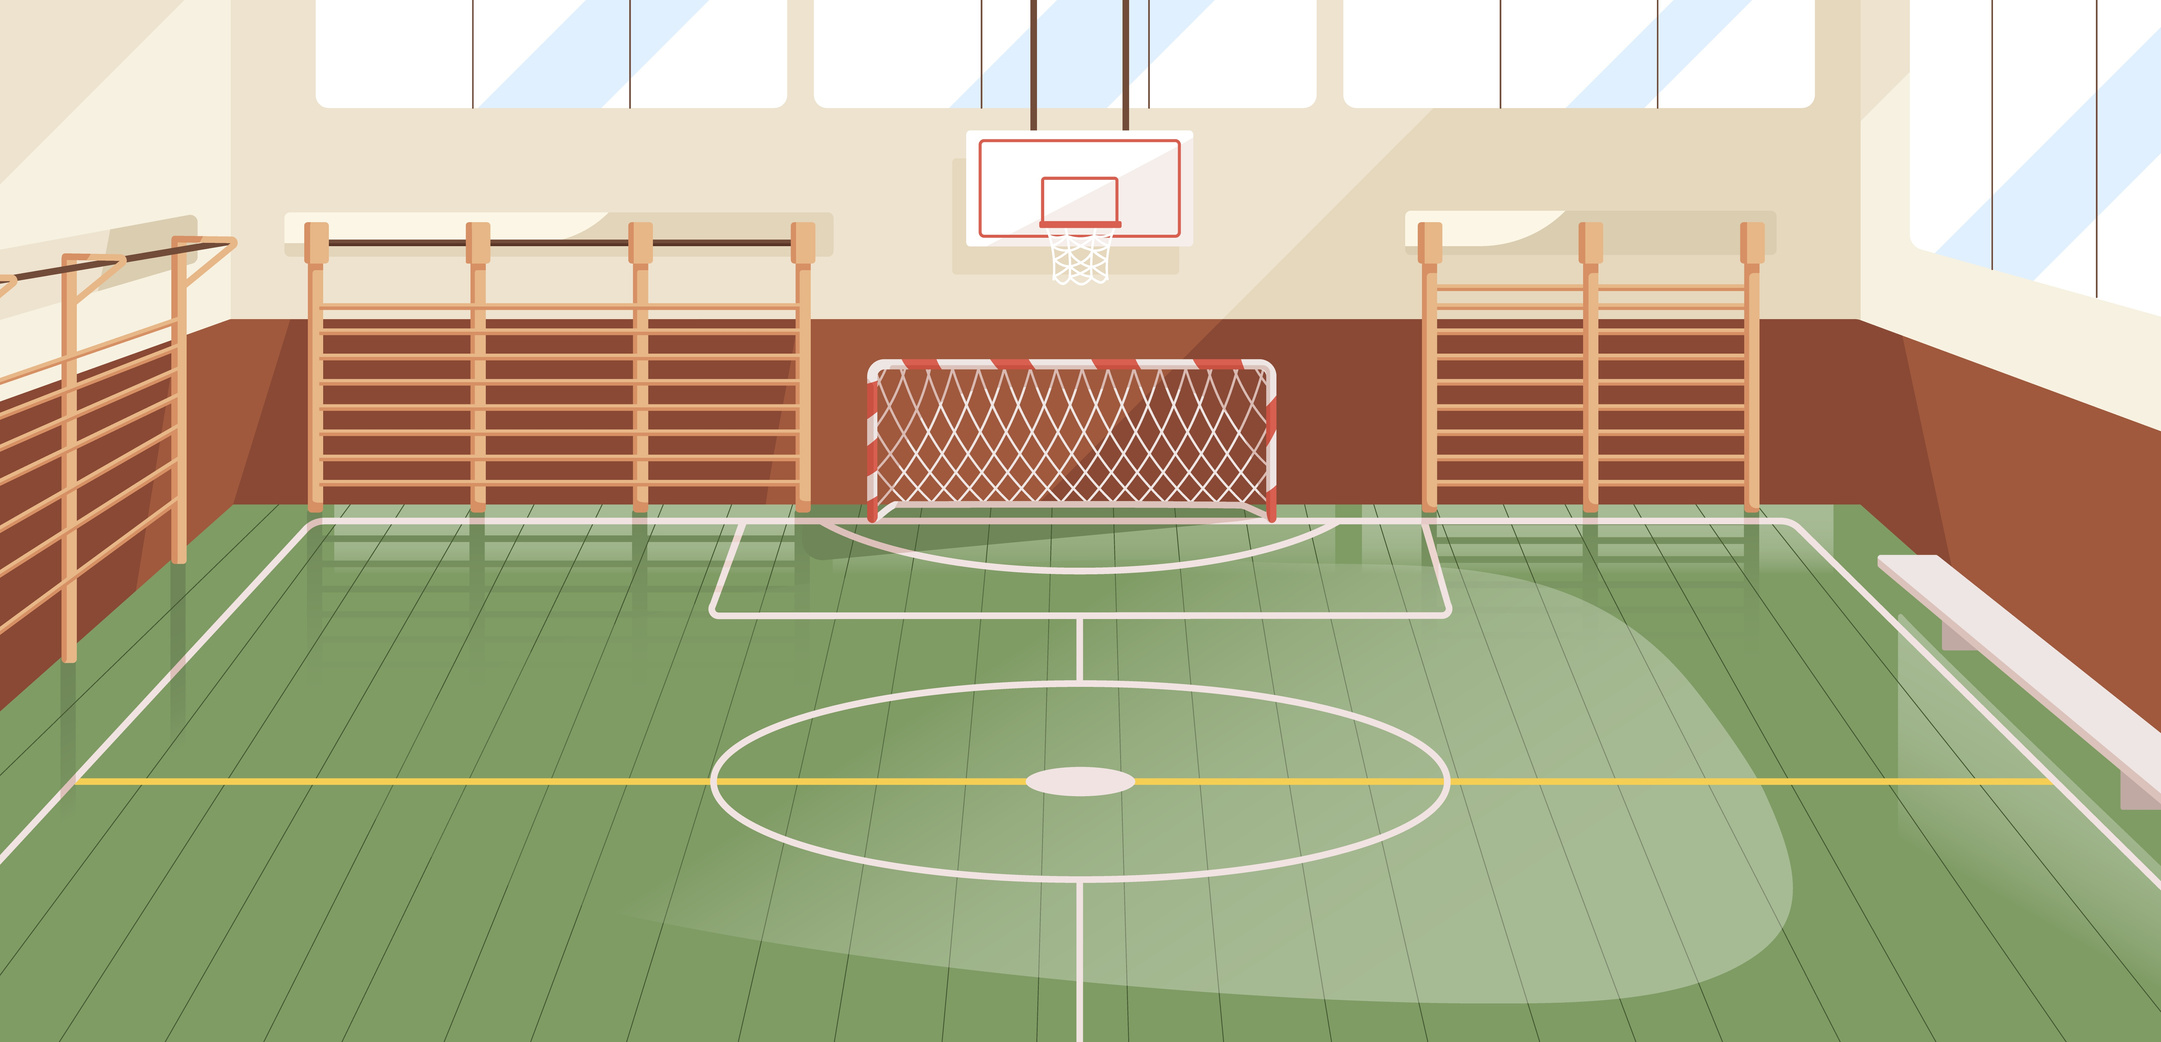 Interior of school gym equipped with basketball hoop, goal and wall bars. Indoor sports hall or court with equipment for playing soccer, football and handball. Colored flat vector illustration